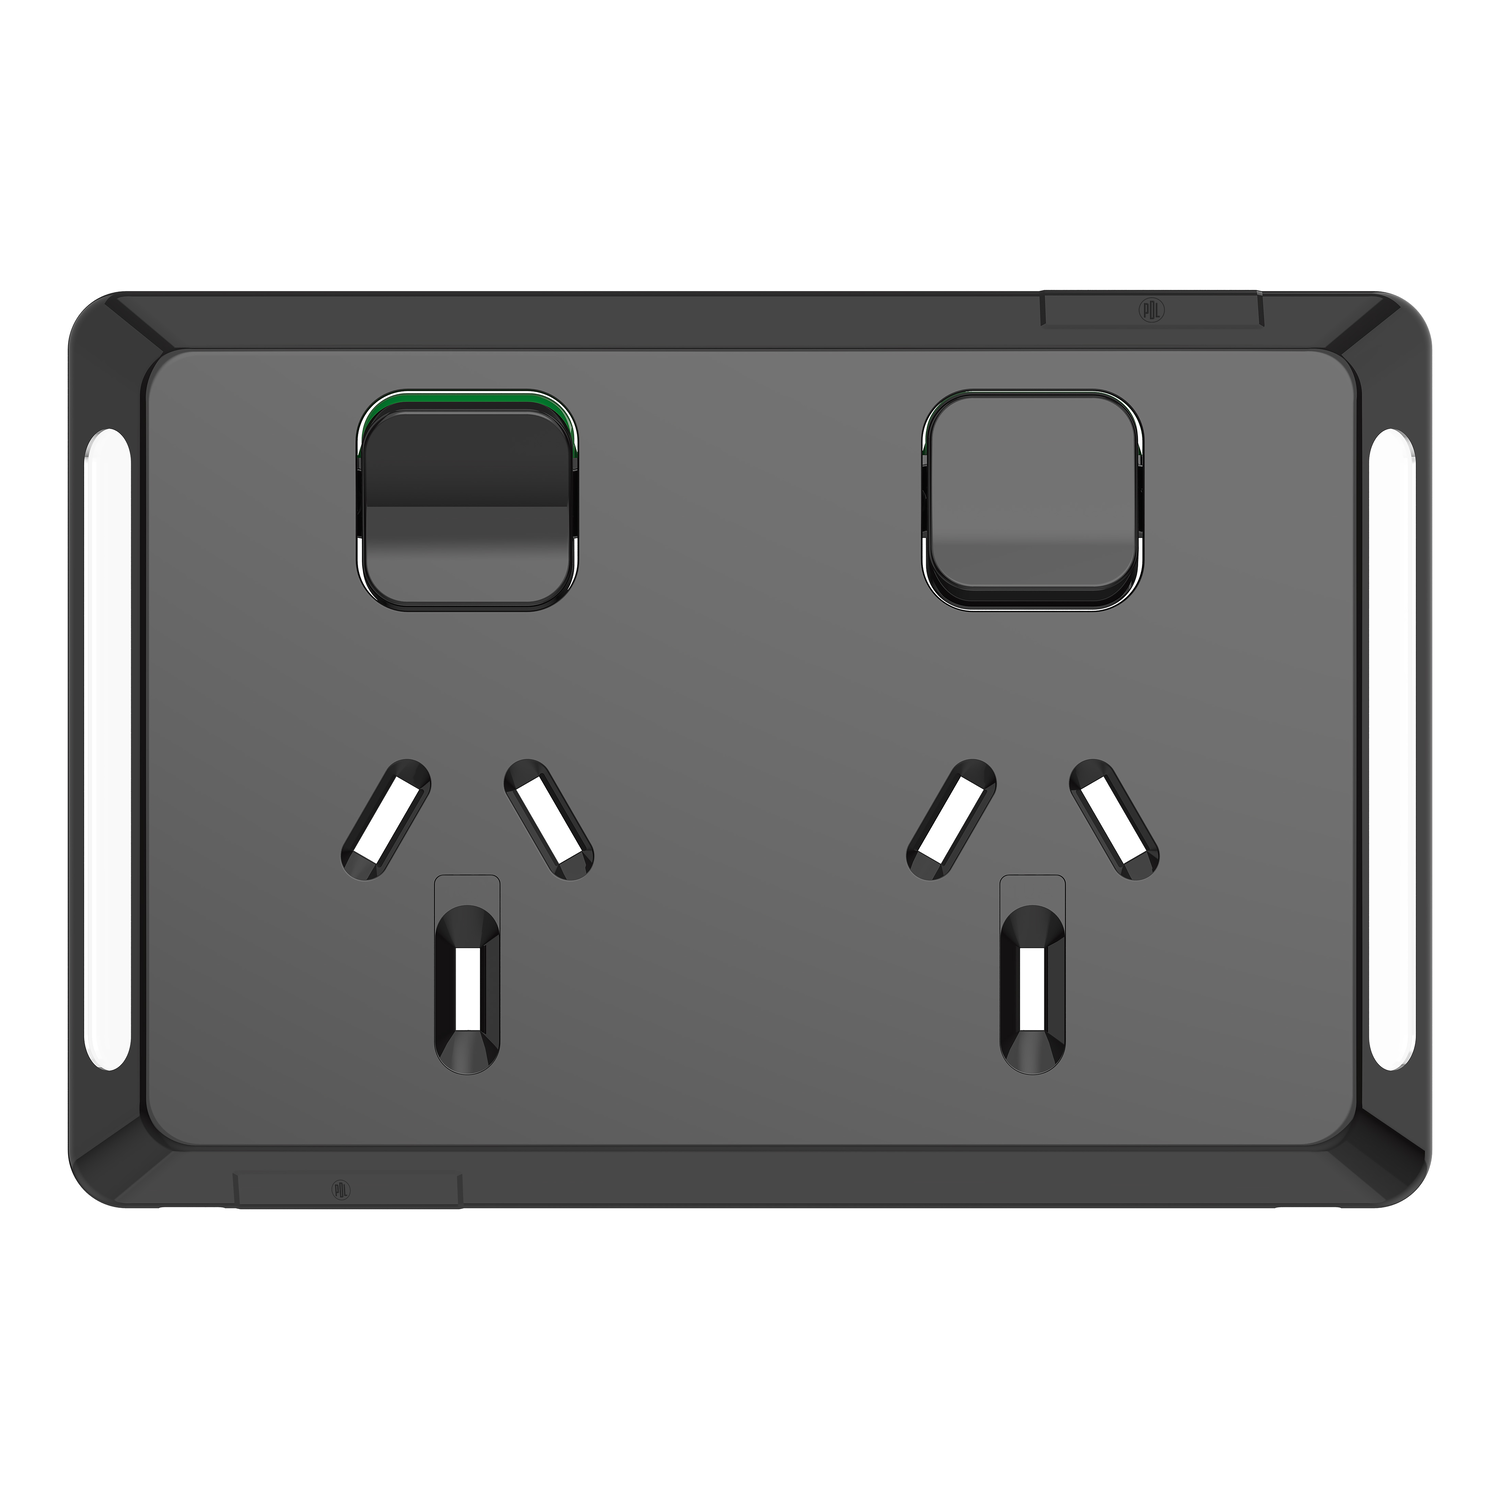 PDL Pro Series - Cover Plate Double Swiched Socket 10A Horizontal - Black